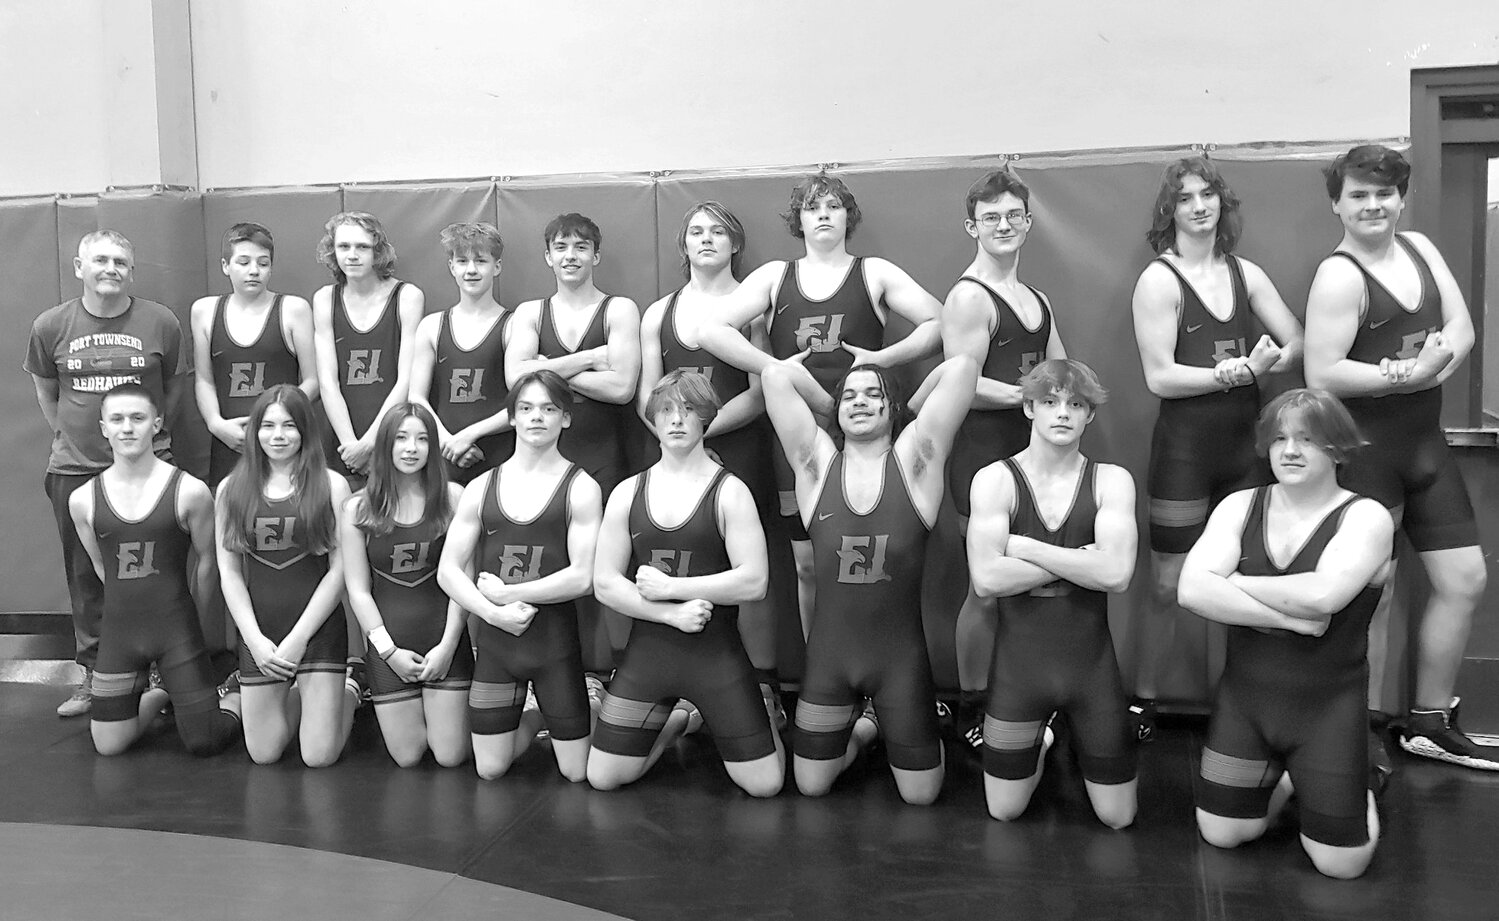 In the past 20 years the combined Chimacum/PT Wrestling team would average 2 wrestlers from Chimacum High School. This year things have changed, in a very impressive way. These are 17 of the currently 22 registered Chimacum High School Students on the Rivals team this year.
Left to right, back:  Coach Jim Wilcox, Daniel Avila, Nathan Ericson, Caleb Johnson, Rylan Dunn, Phoenyx DeAngelis, Oliver Ingersoll, Ethan Perovich, Seth Nielsen, James Van Otten.  Left to right, front:  Isaiah Johnson, Gracee Liske, Akili Clevenger, Jeremiah Salmon Jr., Carver Williamson-Roberts, Lorenzo Azure, Jackson Dupuy, Elijah Johnson.
Photo taken during team picture day on Tuesday, Nov. 28. The Rivals Wrestling team springs into action this Thursday, 30 November with a 4 team jamboree at Port Angeles. Wrestling commences at 5 p.m. Teams from Forks, Port Angeles, Sequim, and East Jefferson will all compete. photo by Ryan White